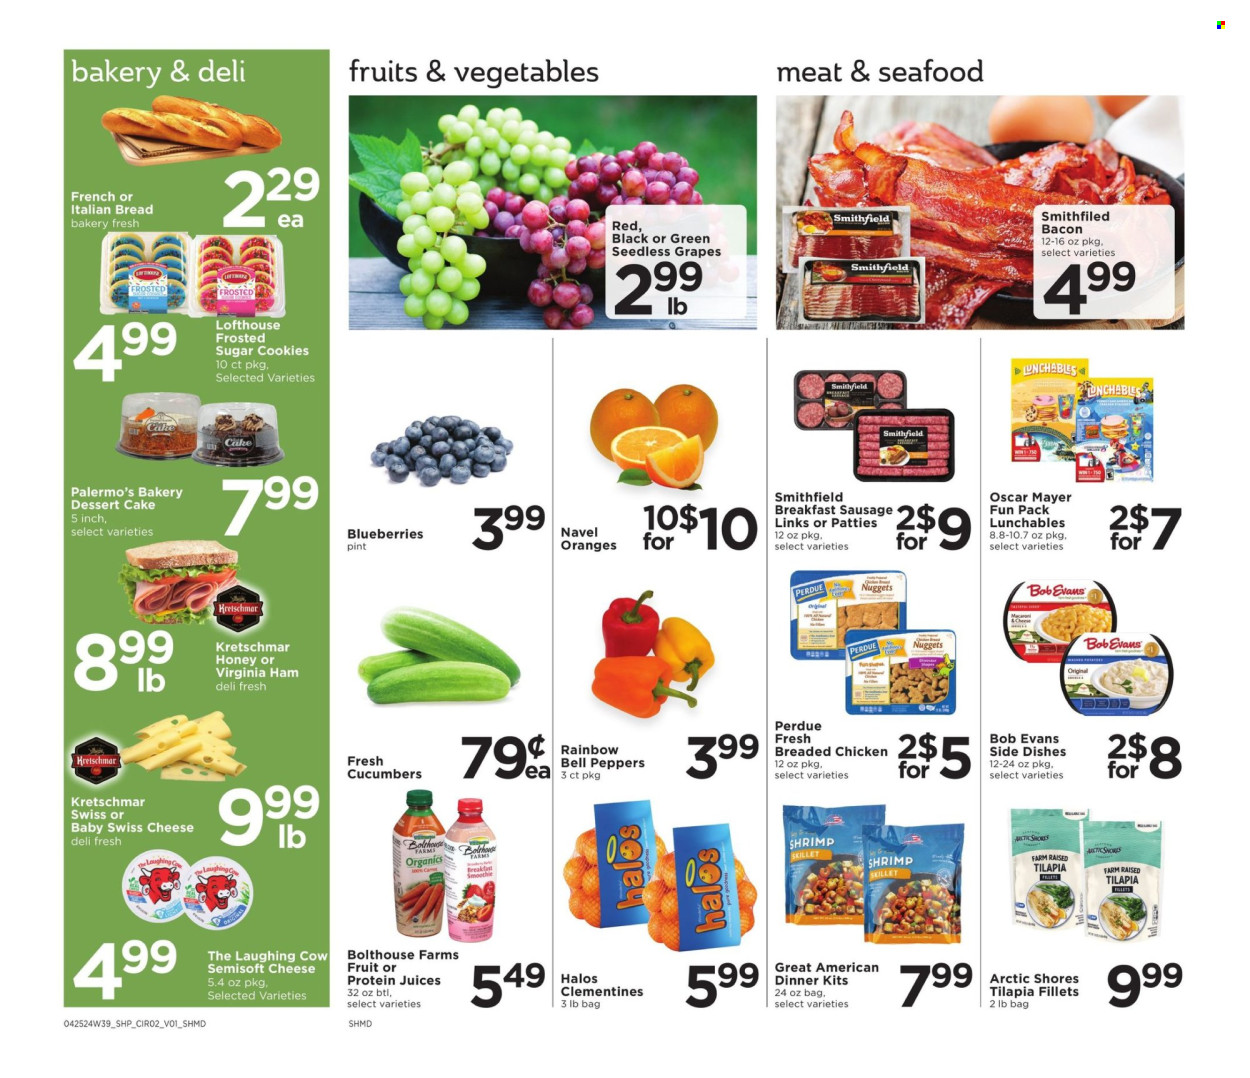 Shoppers ad  - 04.25.2024 - 05.01.2024.